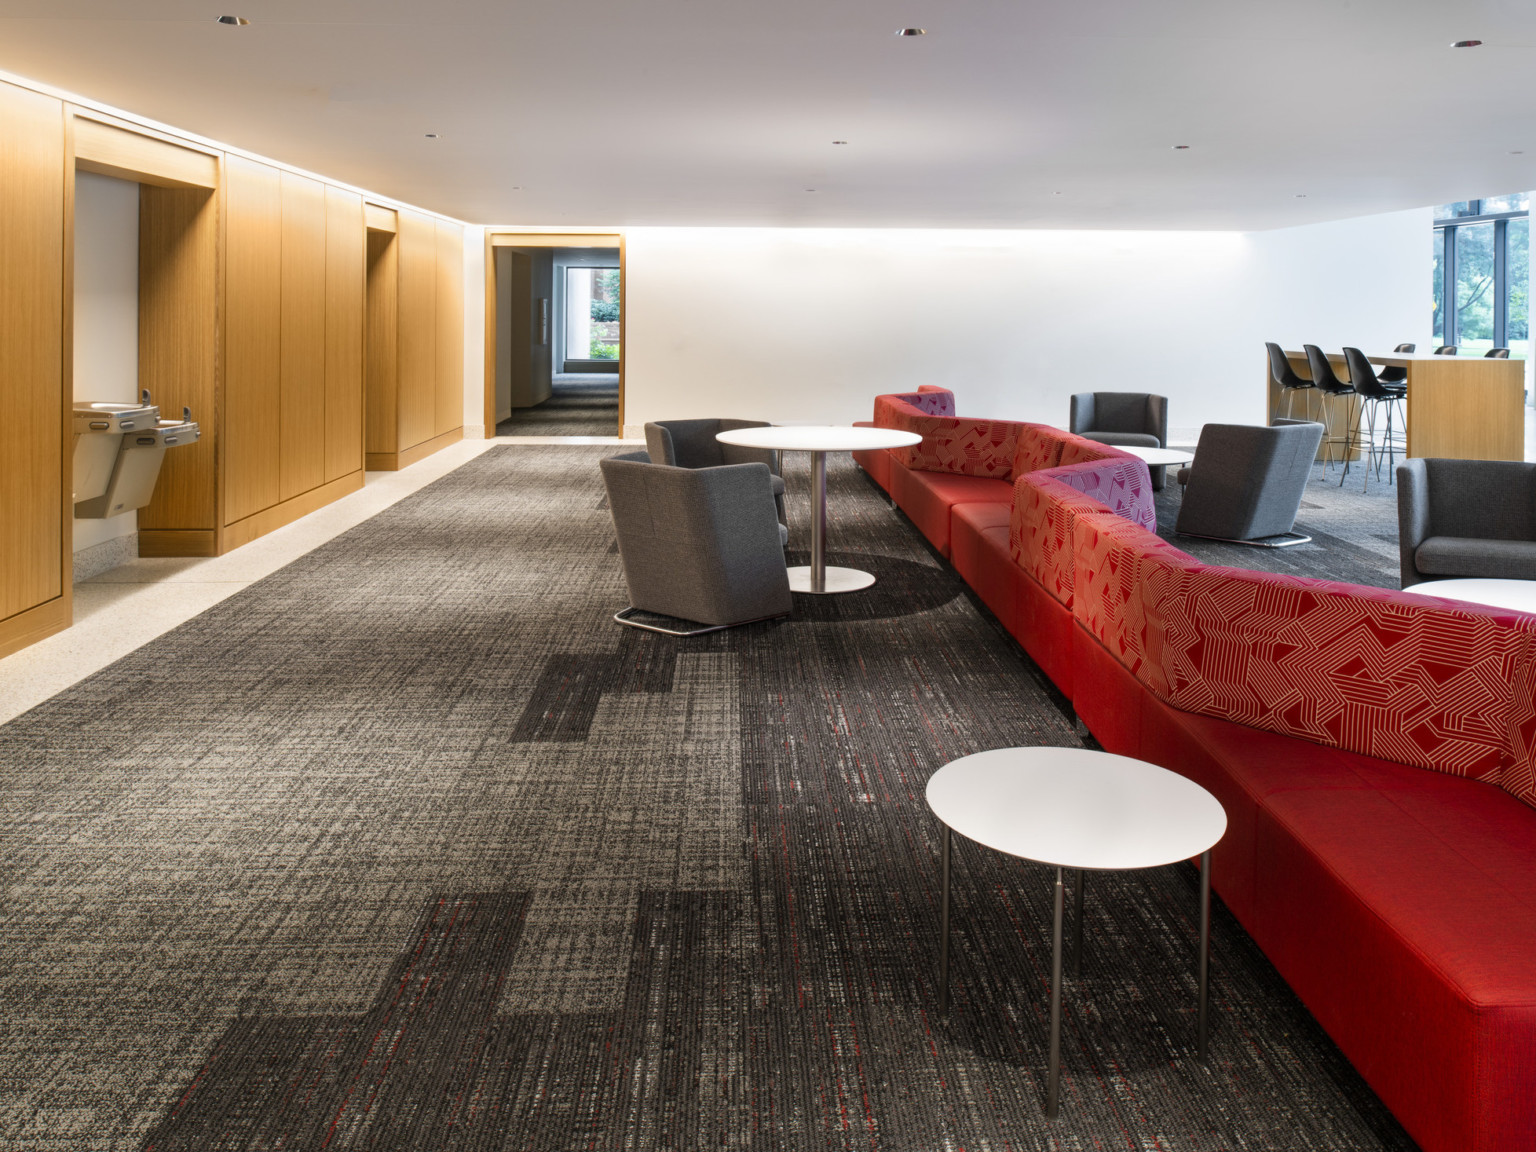 Mixed seating in common space lobby with counters, red geometric double-sided sofa, armchairs. Wood hidden cabinets, left